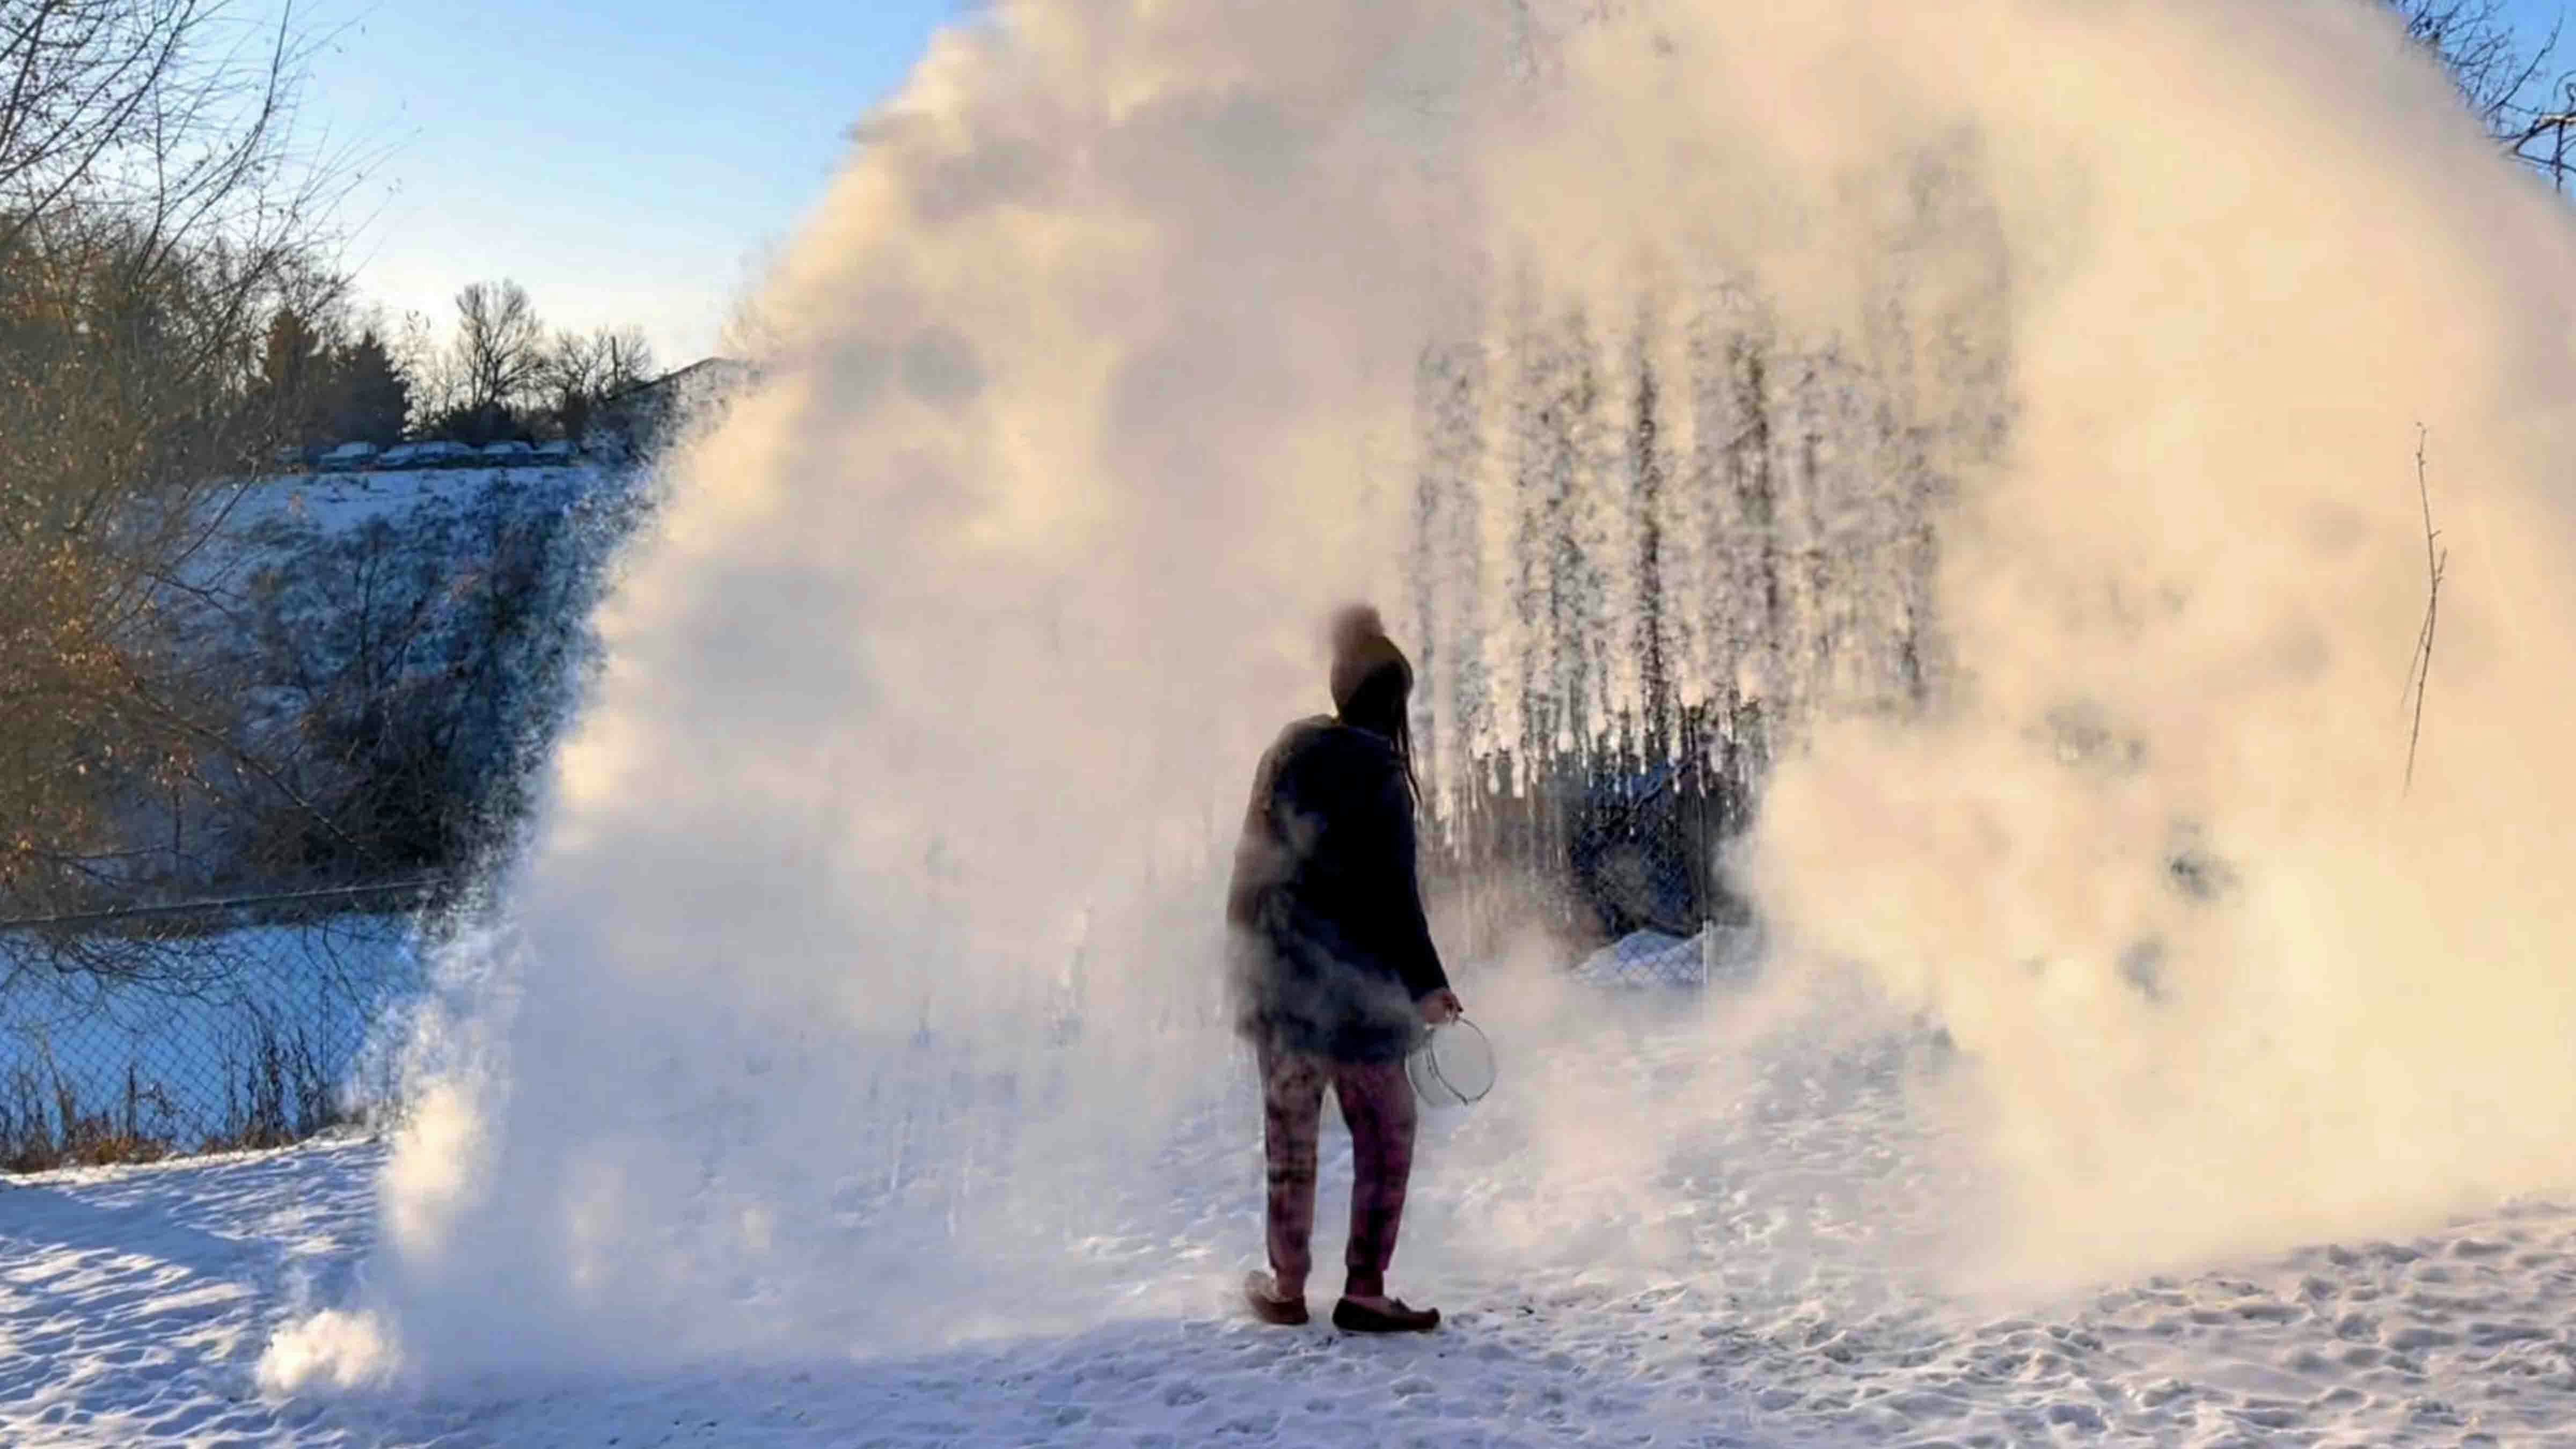 "A little fun with boiling water in this cold weather in Sheridan on Jan 13, 2024